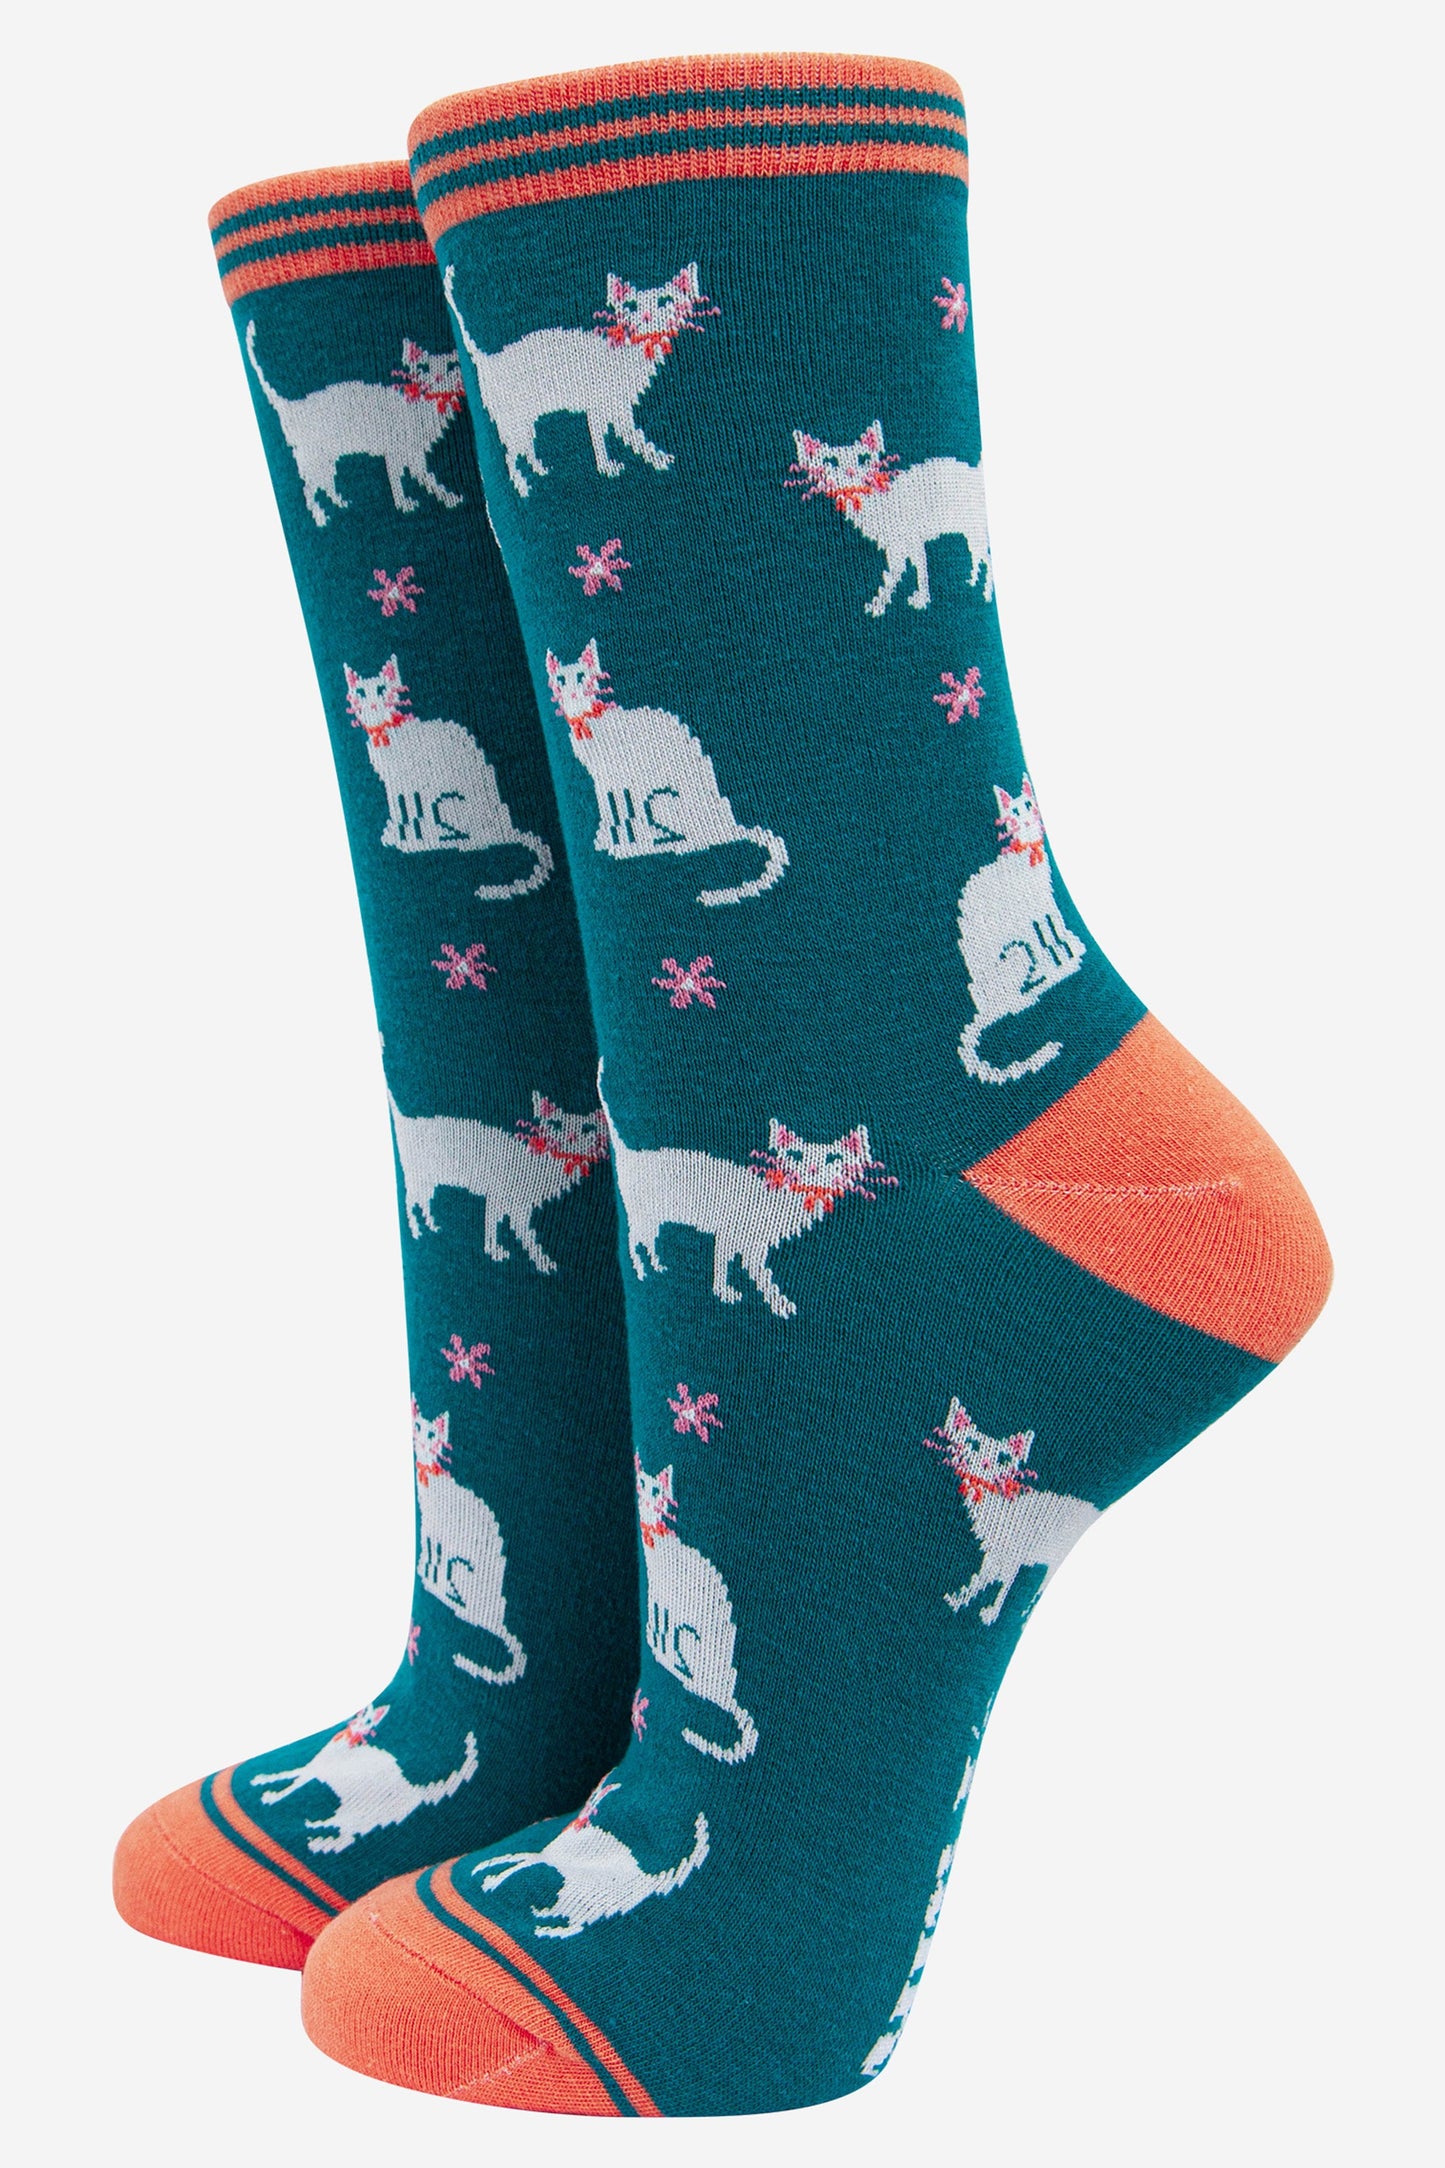 teal bamboo ankle socks with an all over pattern of white cats and pink daisy flowers